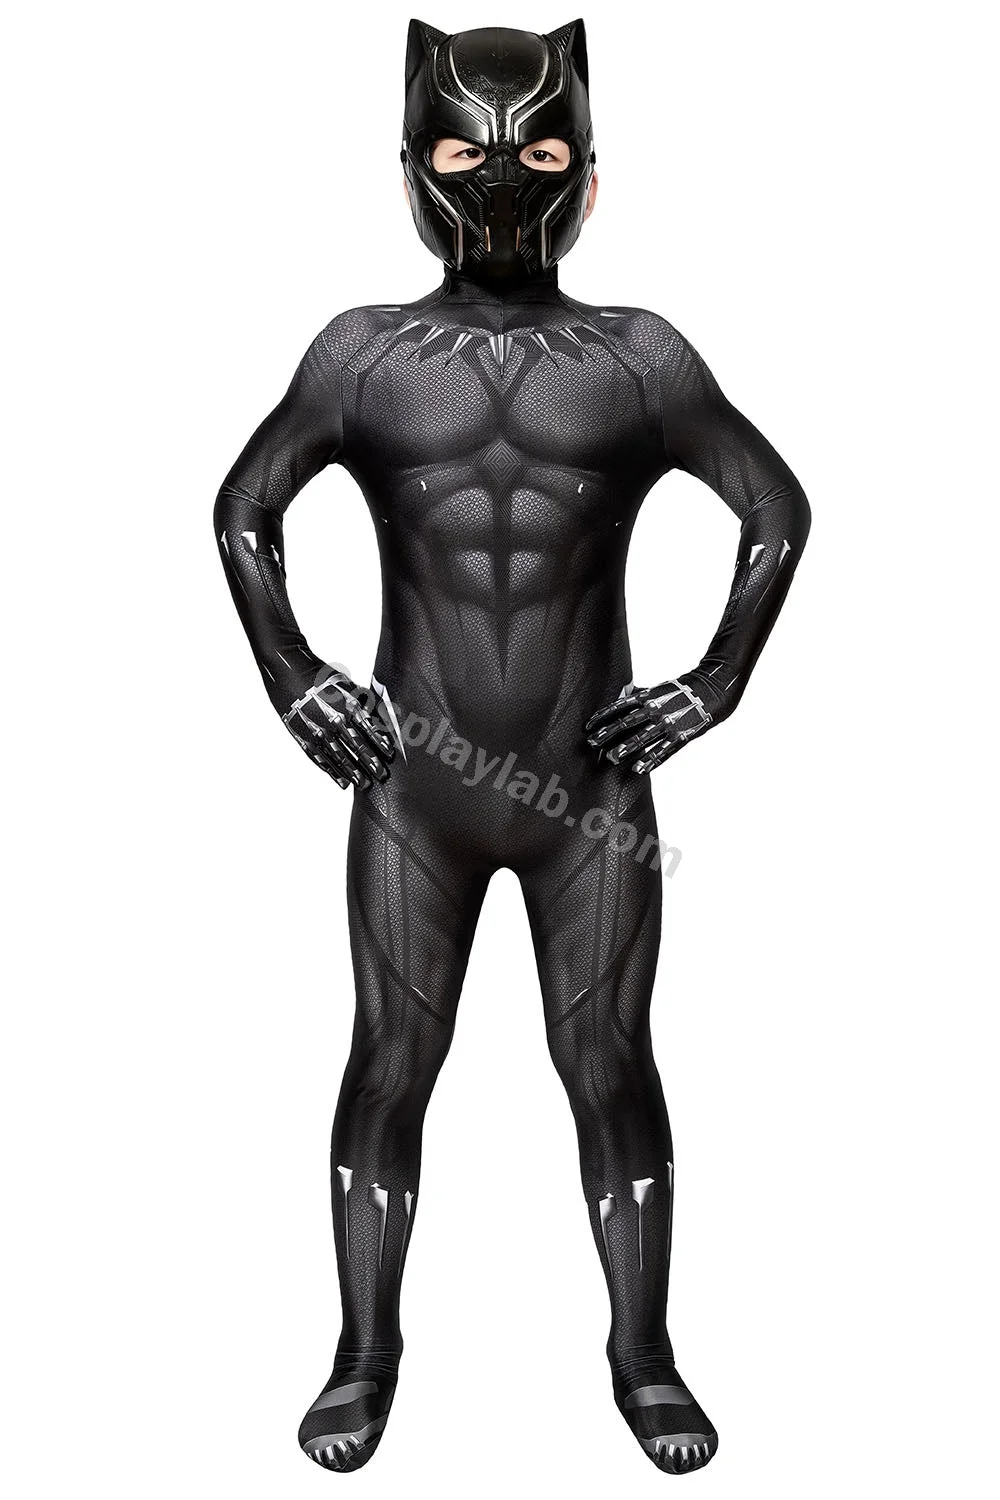 Kids Black Panther Cosplay Costume Endgame Edition For Children Halloween By CosplayLab